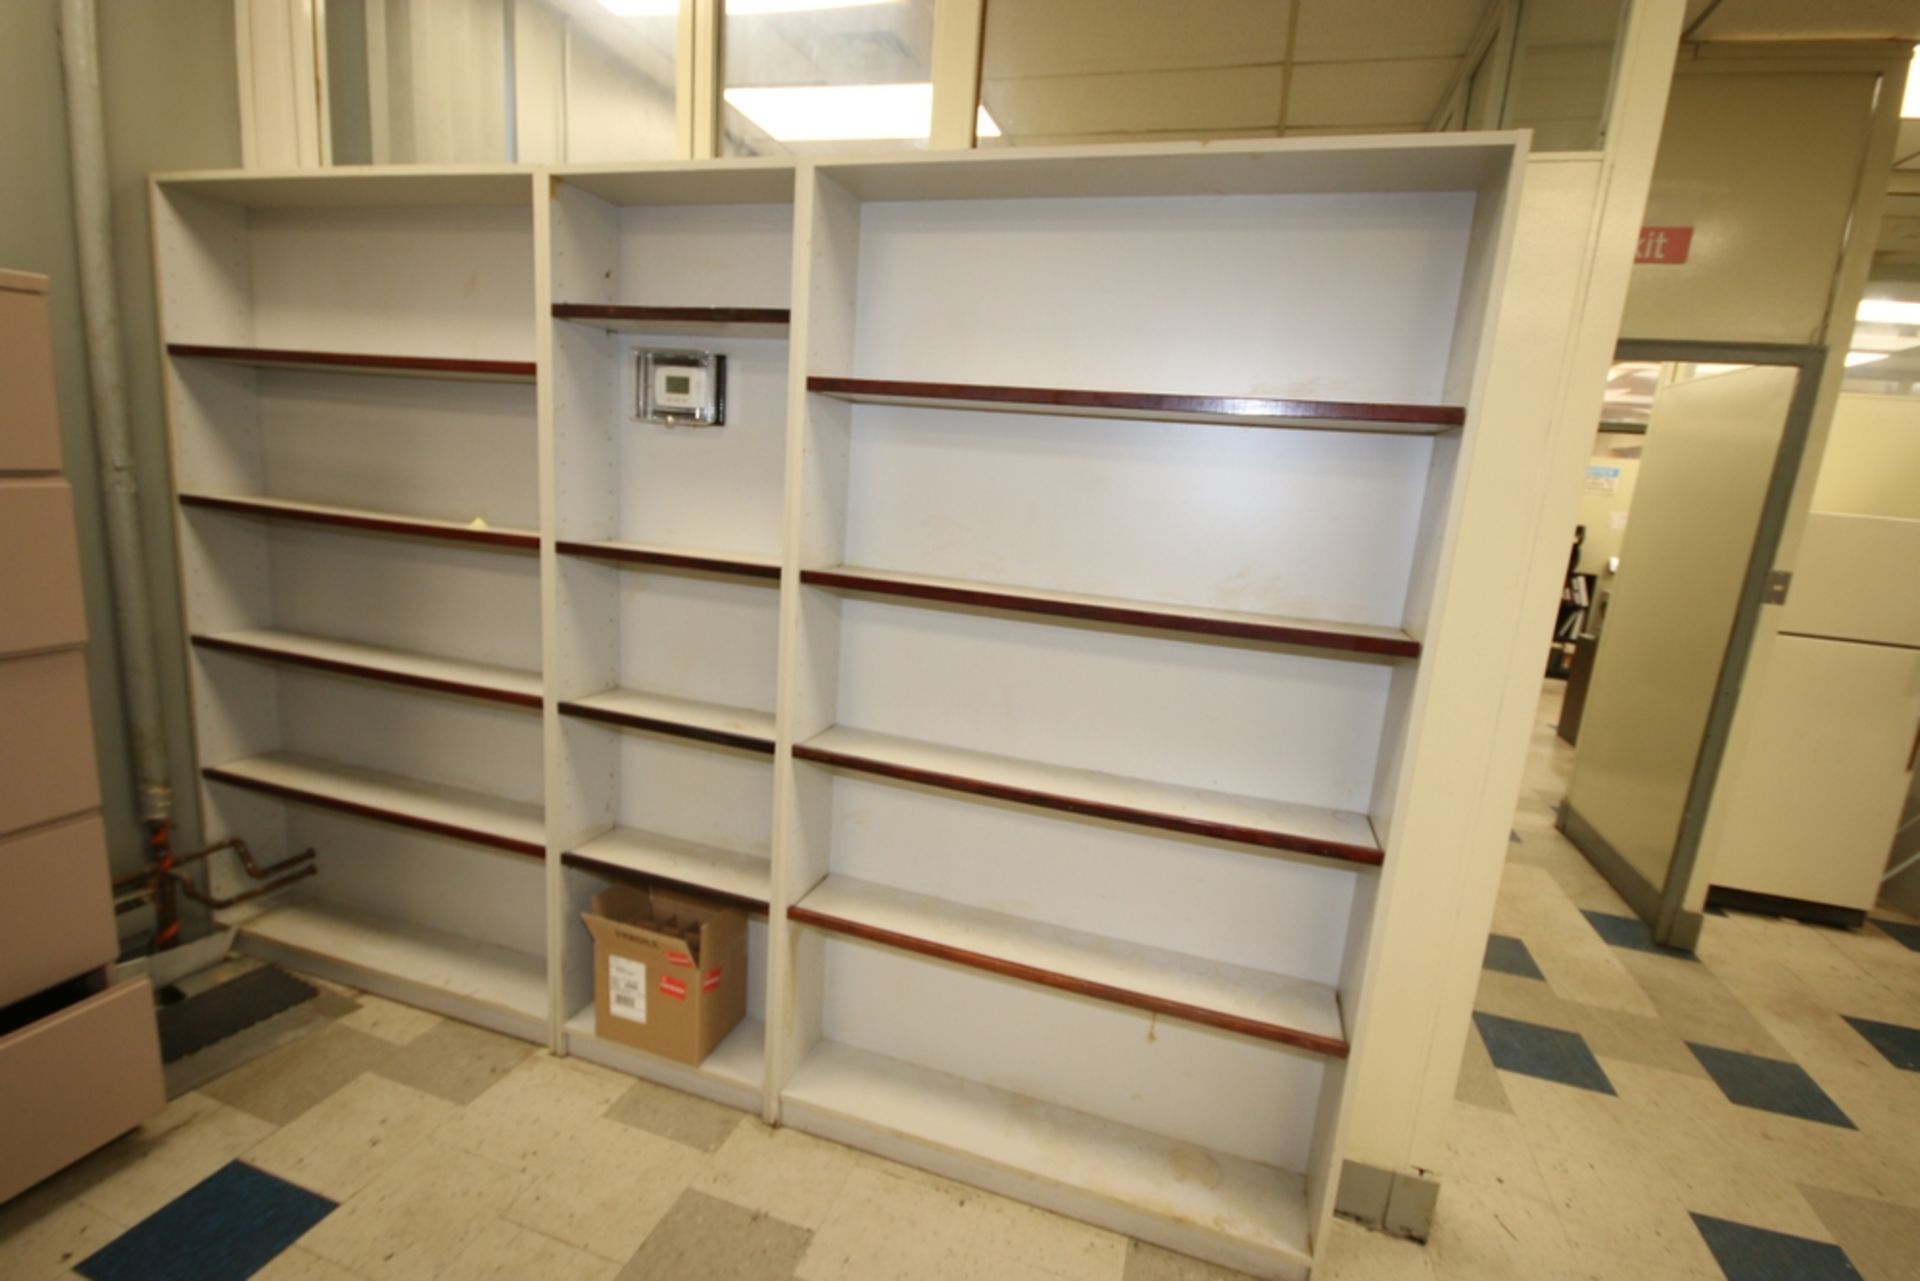 Sections of Wooden Lab Shelving, Section Overall Dims.: Aprox. 7' H x 4' W - Image 3 of 4